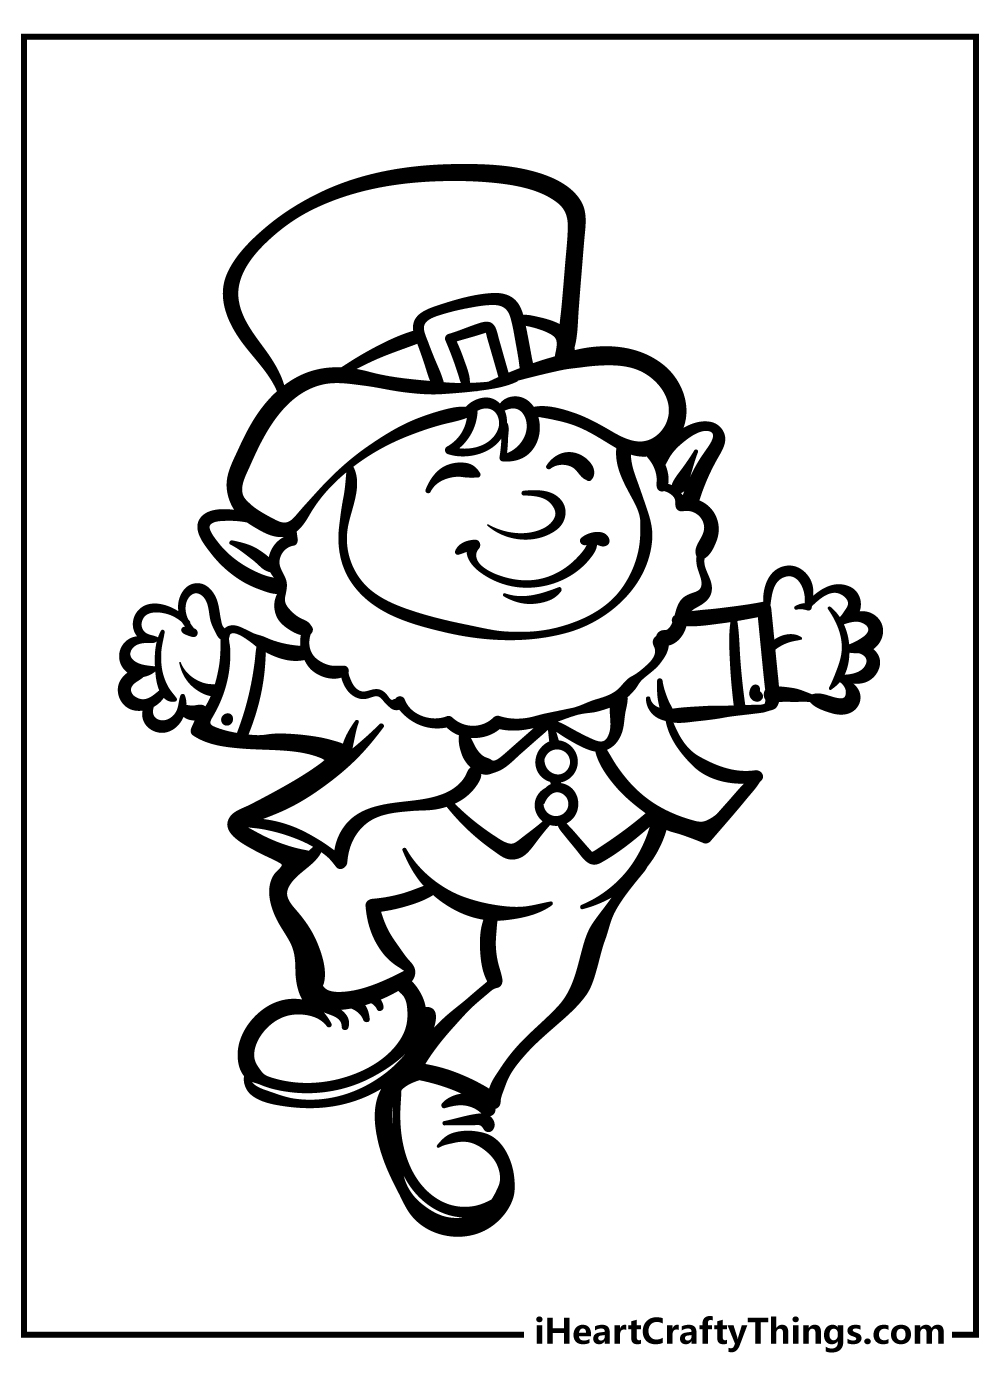 St Patrick’s Day coloring pages free printable